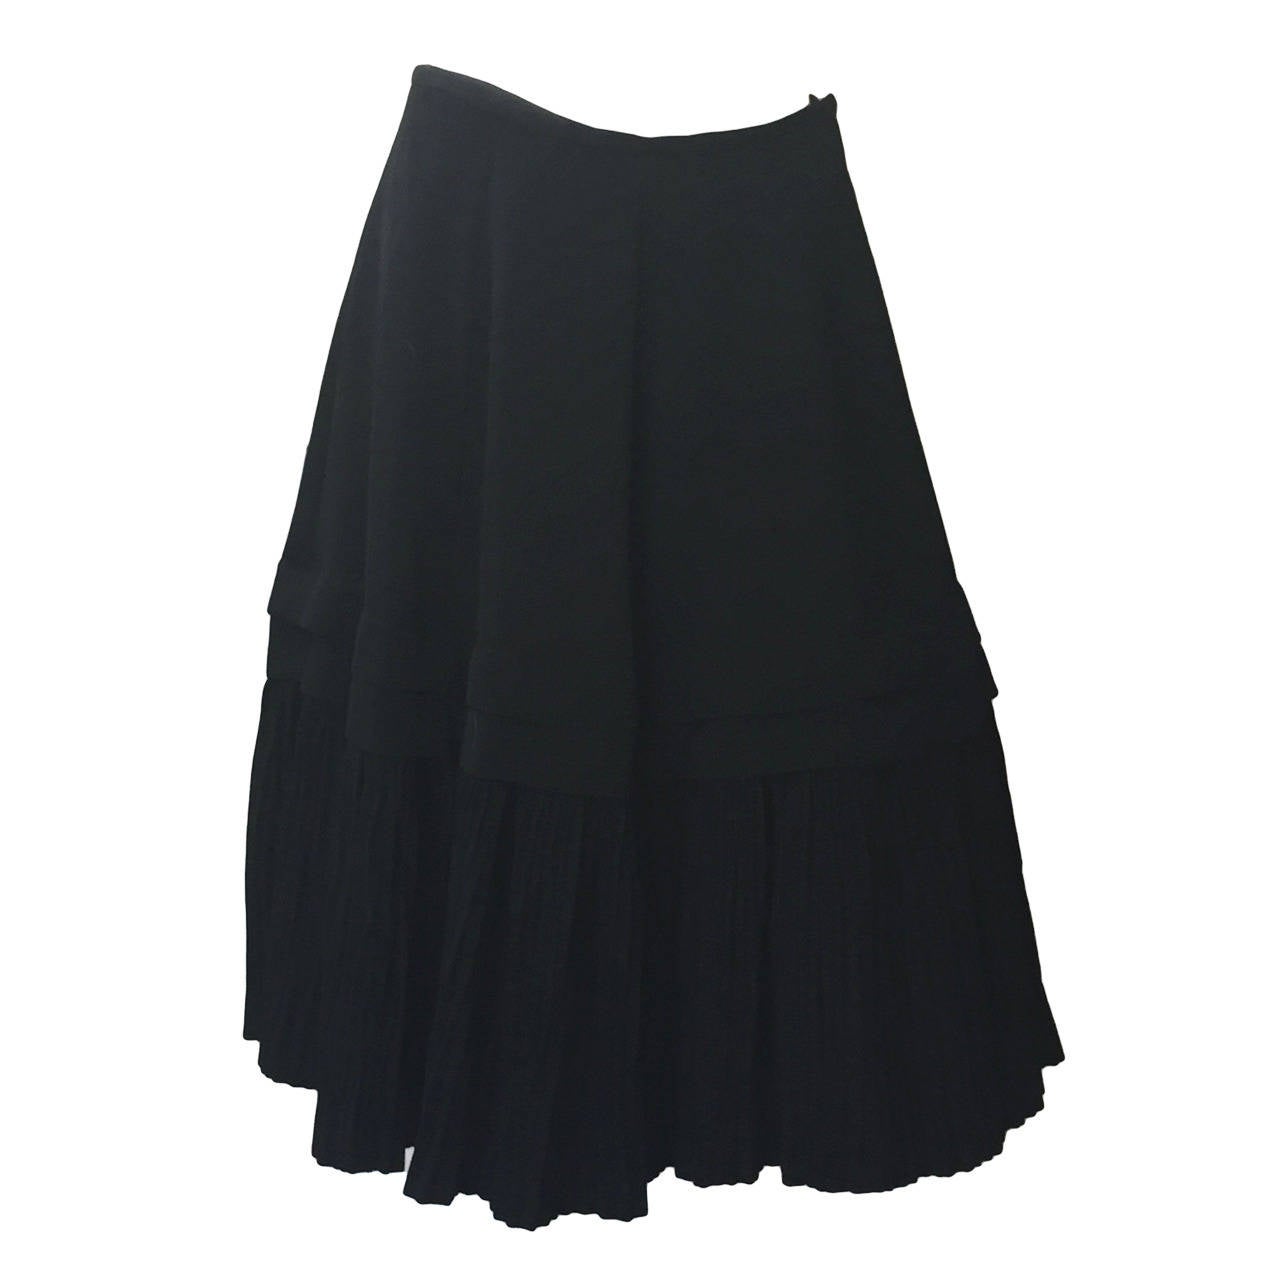 Comme des Garcons by Rei Kawakubo for Bergdorf Goodman skirt size medium. For Sale